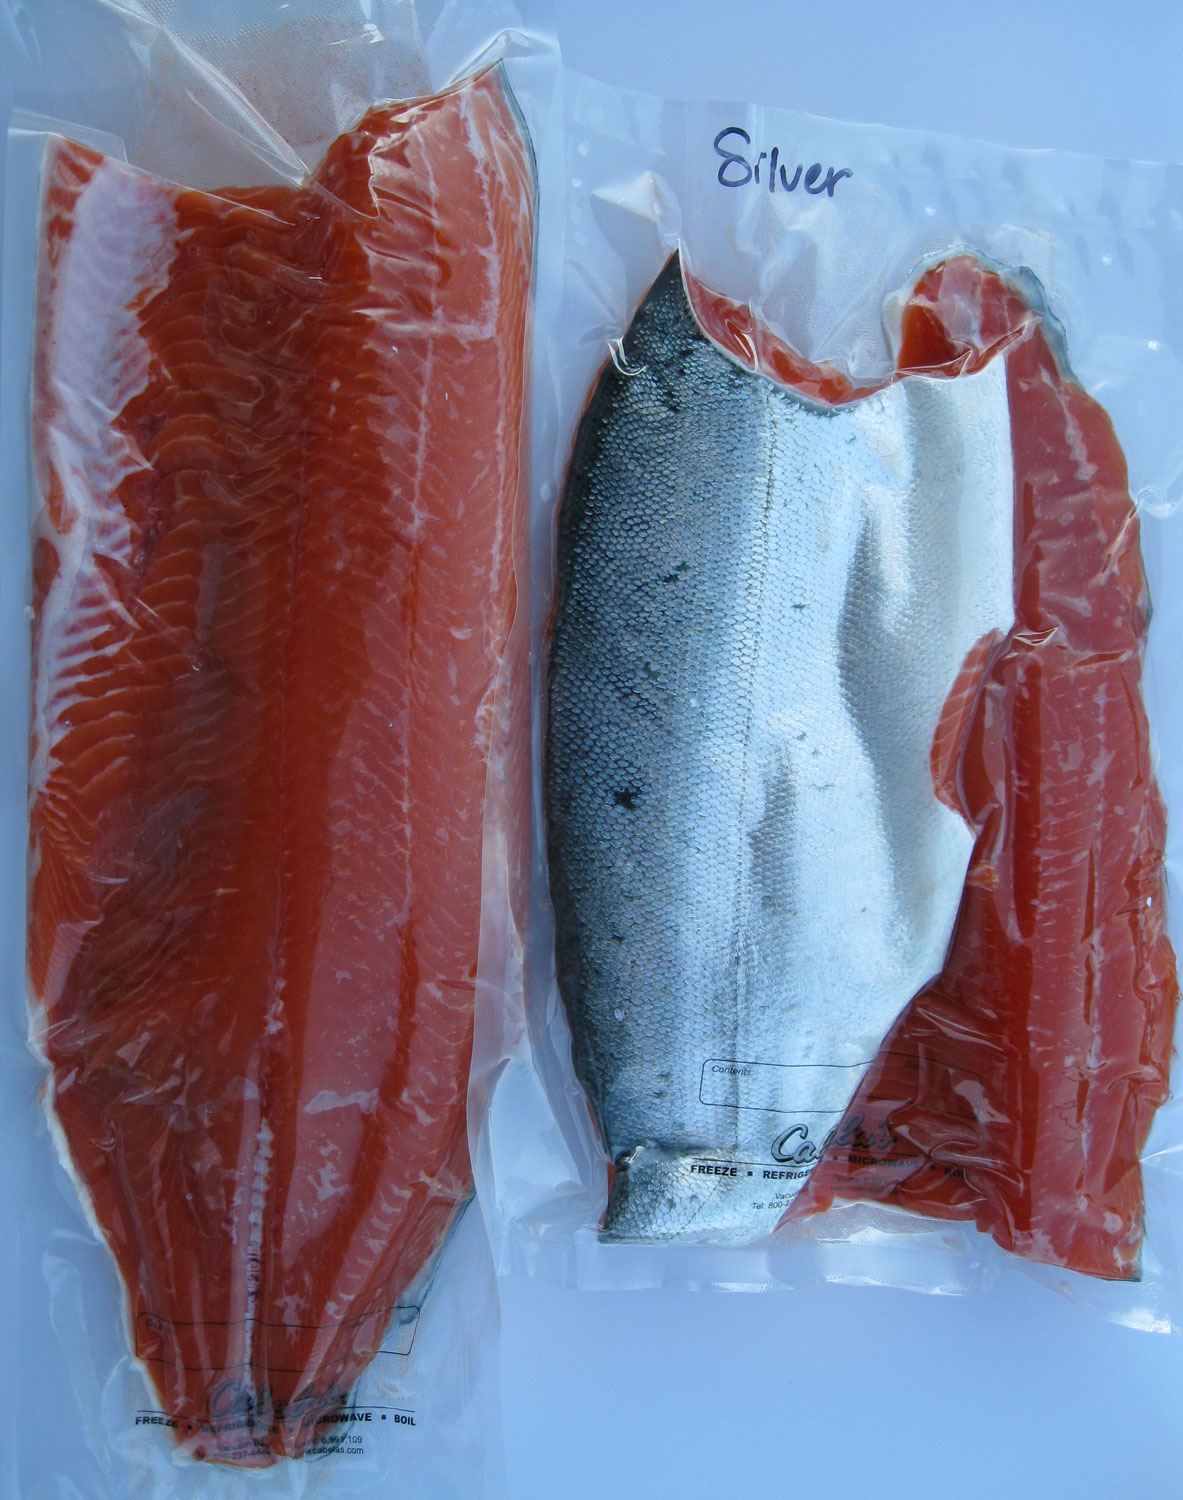 Silver salmon fillets vacuum packed for freezing. 